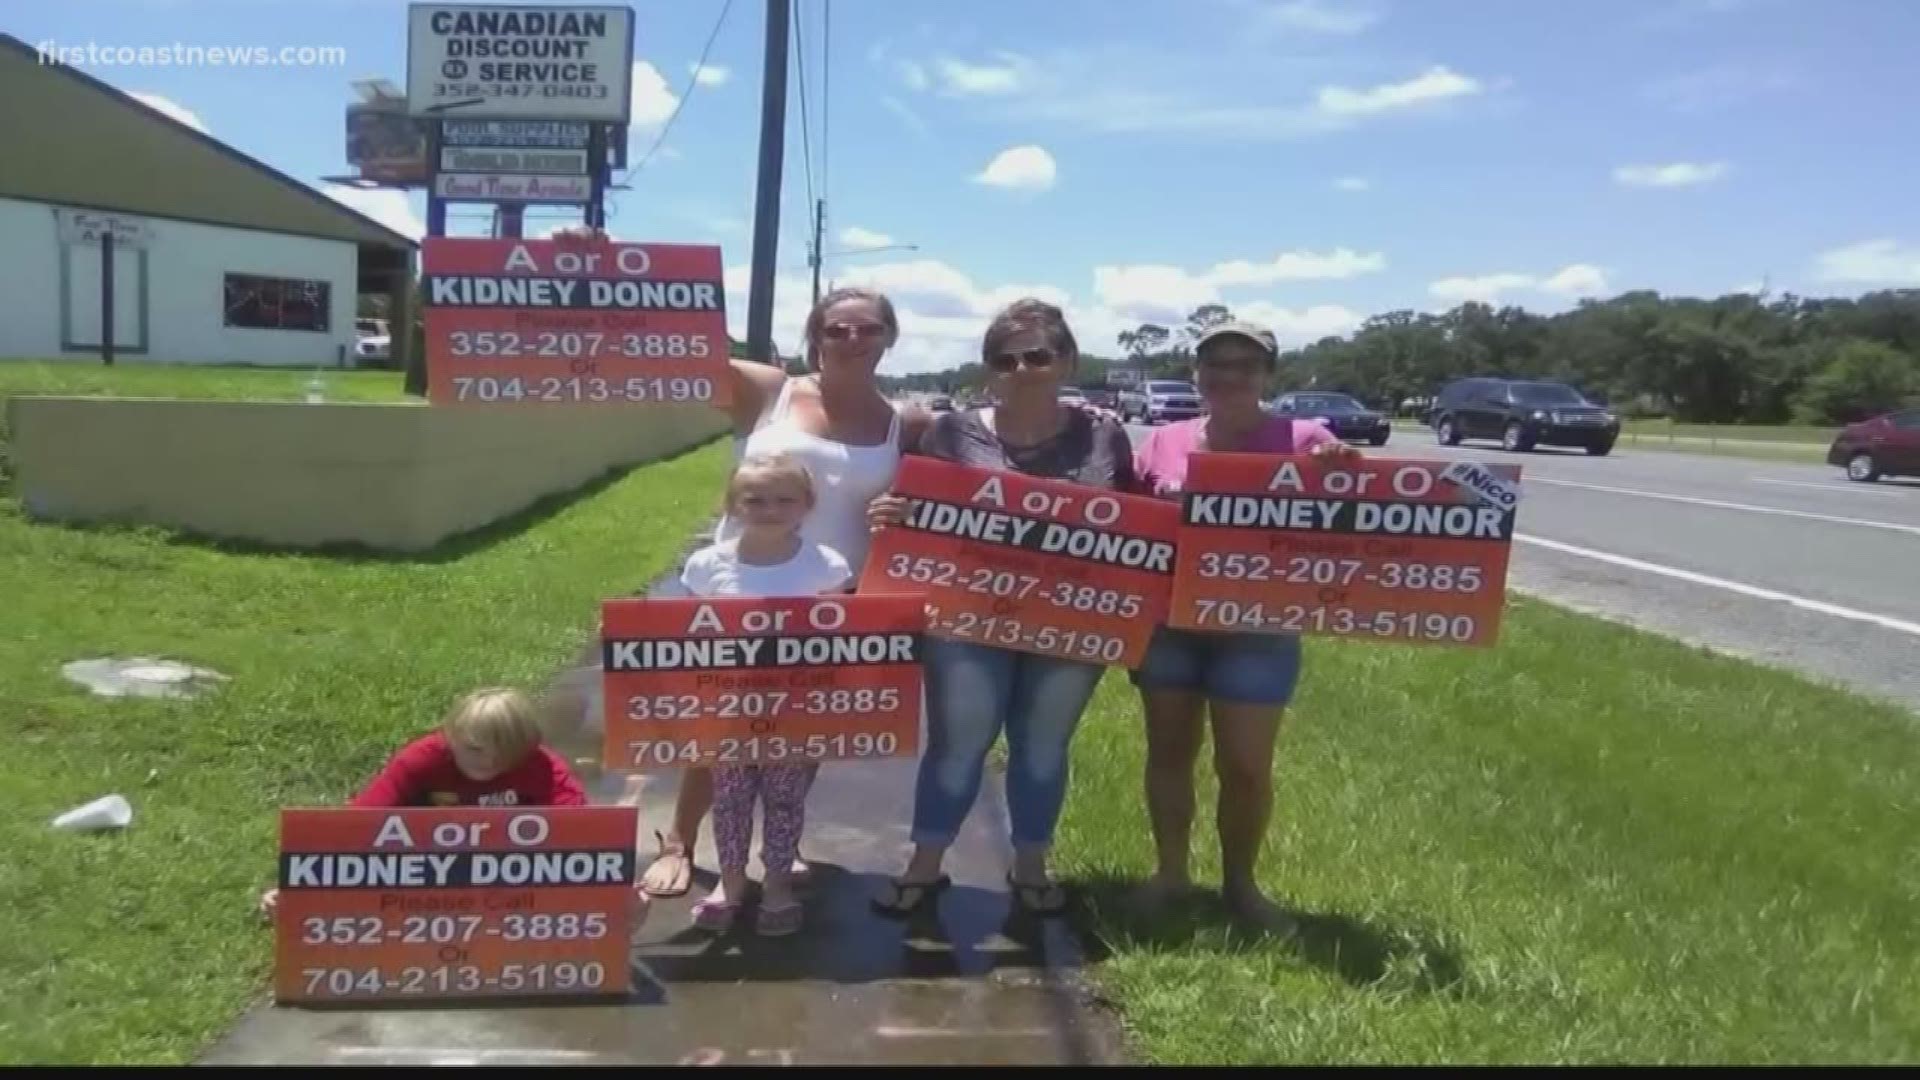 She is standing on street corners asking for a kidney for her son with a rare disorder.